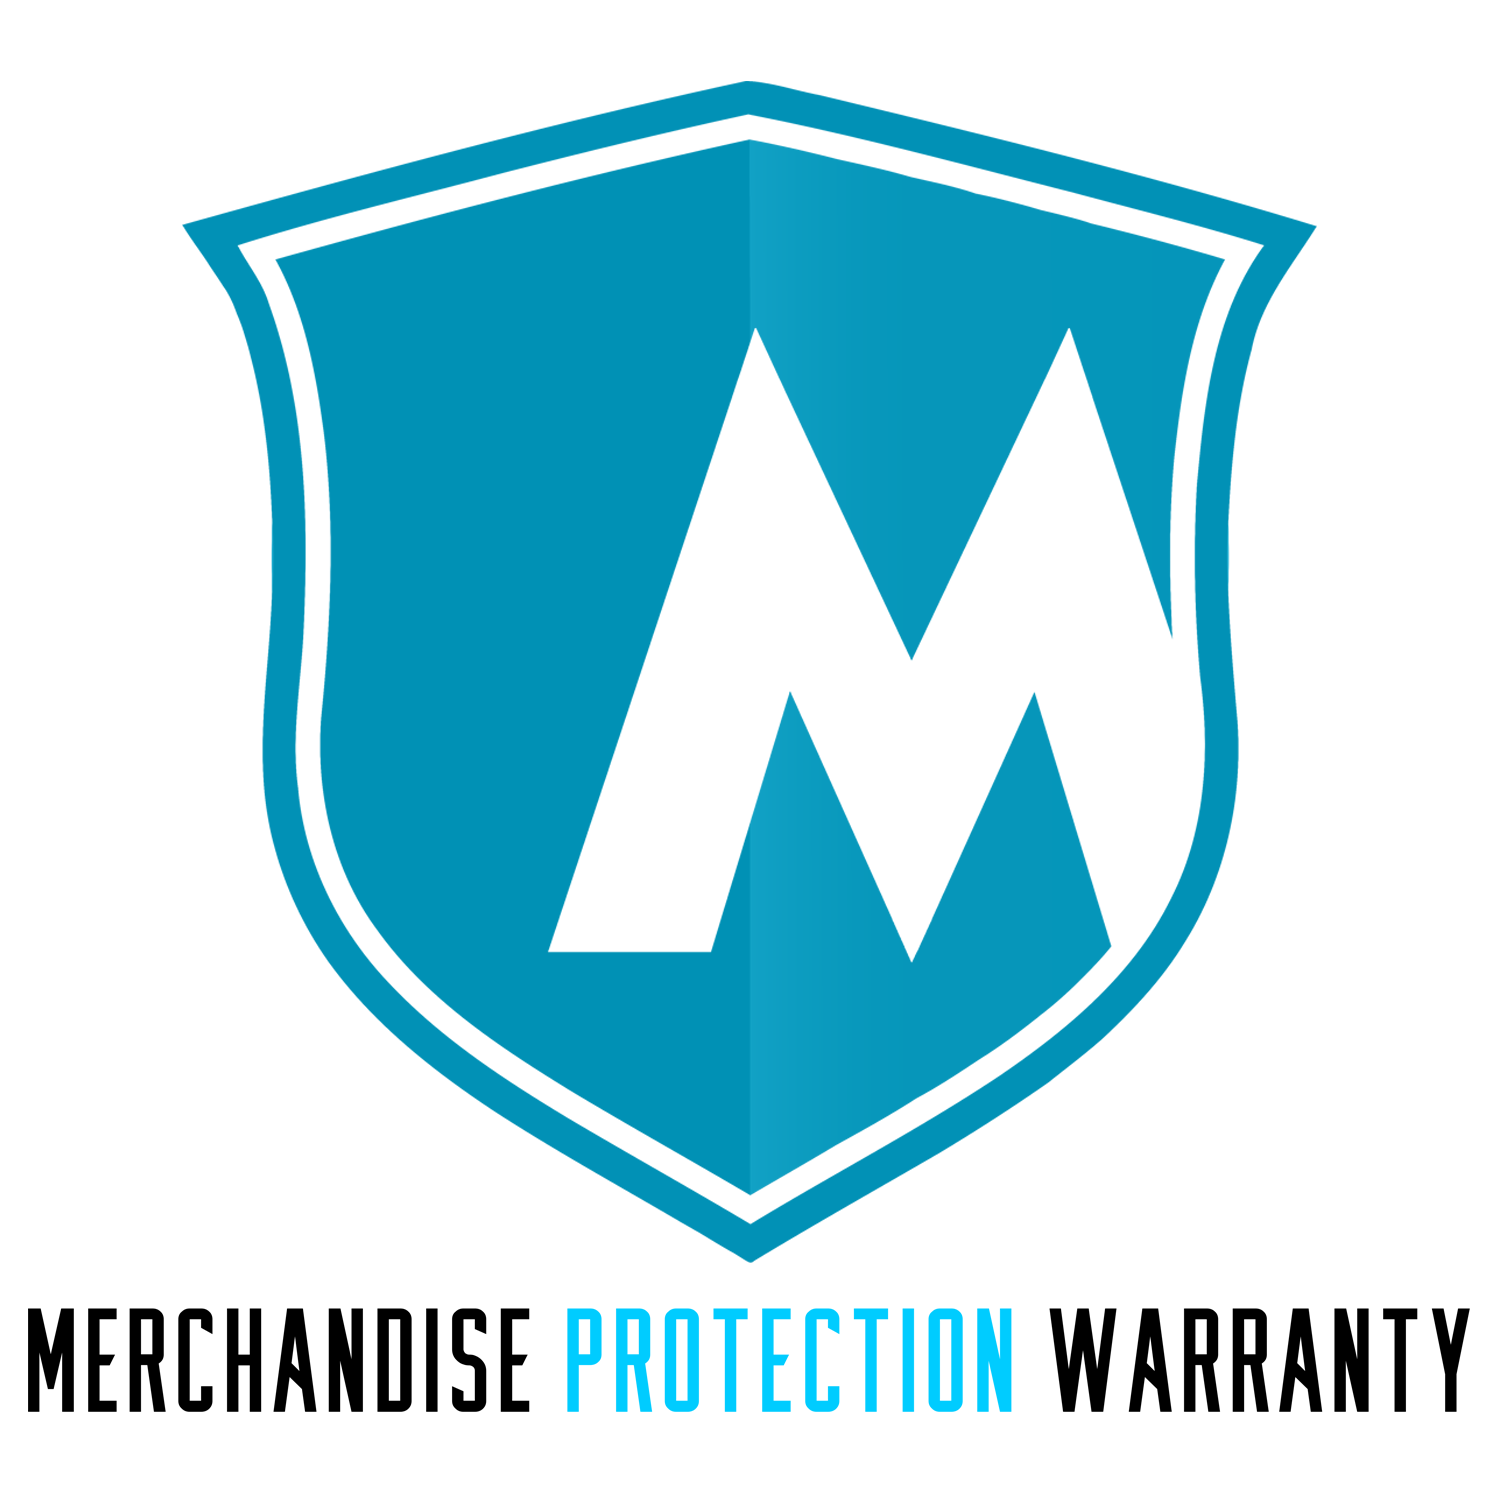 2 Year Merchandise Protection Warranty under $4000 (Accidental, Prepaid Shipping)